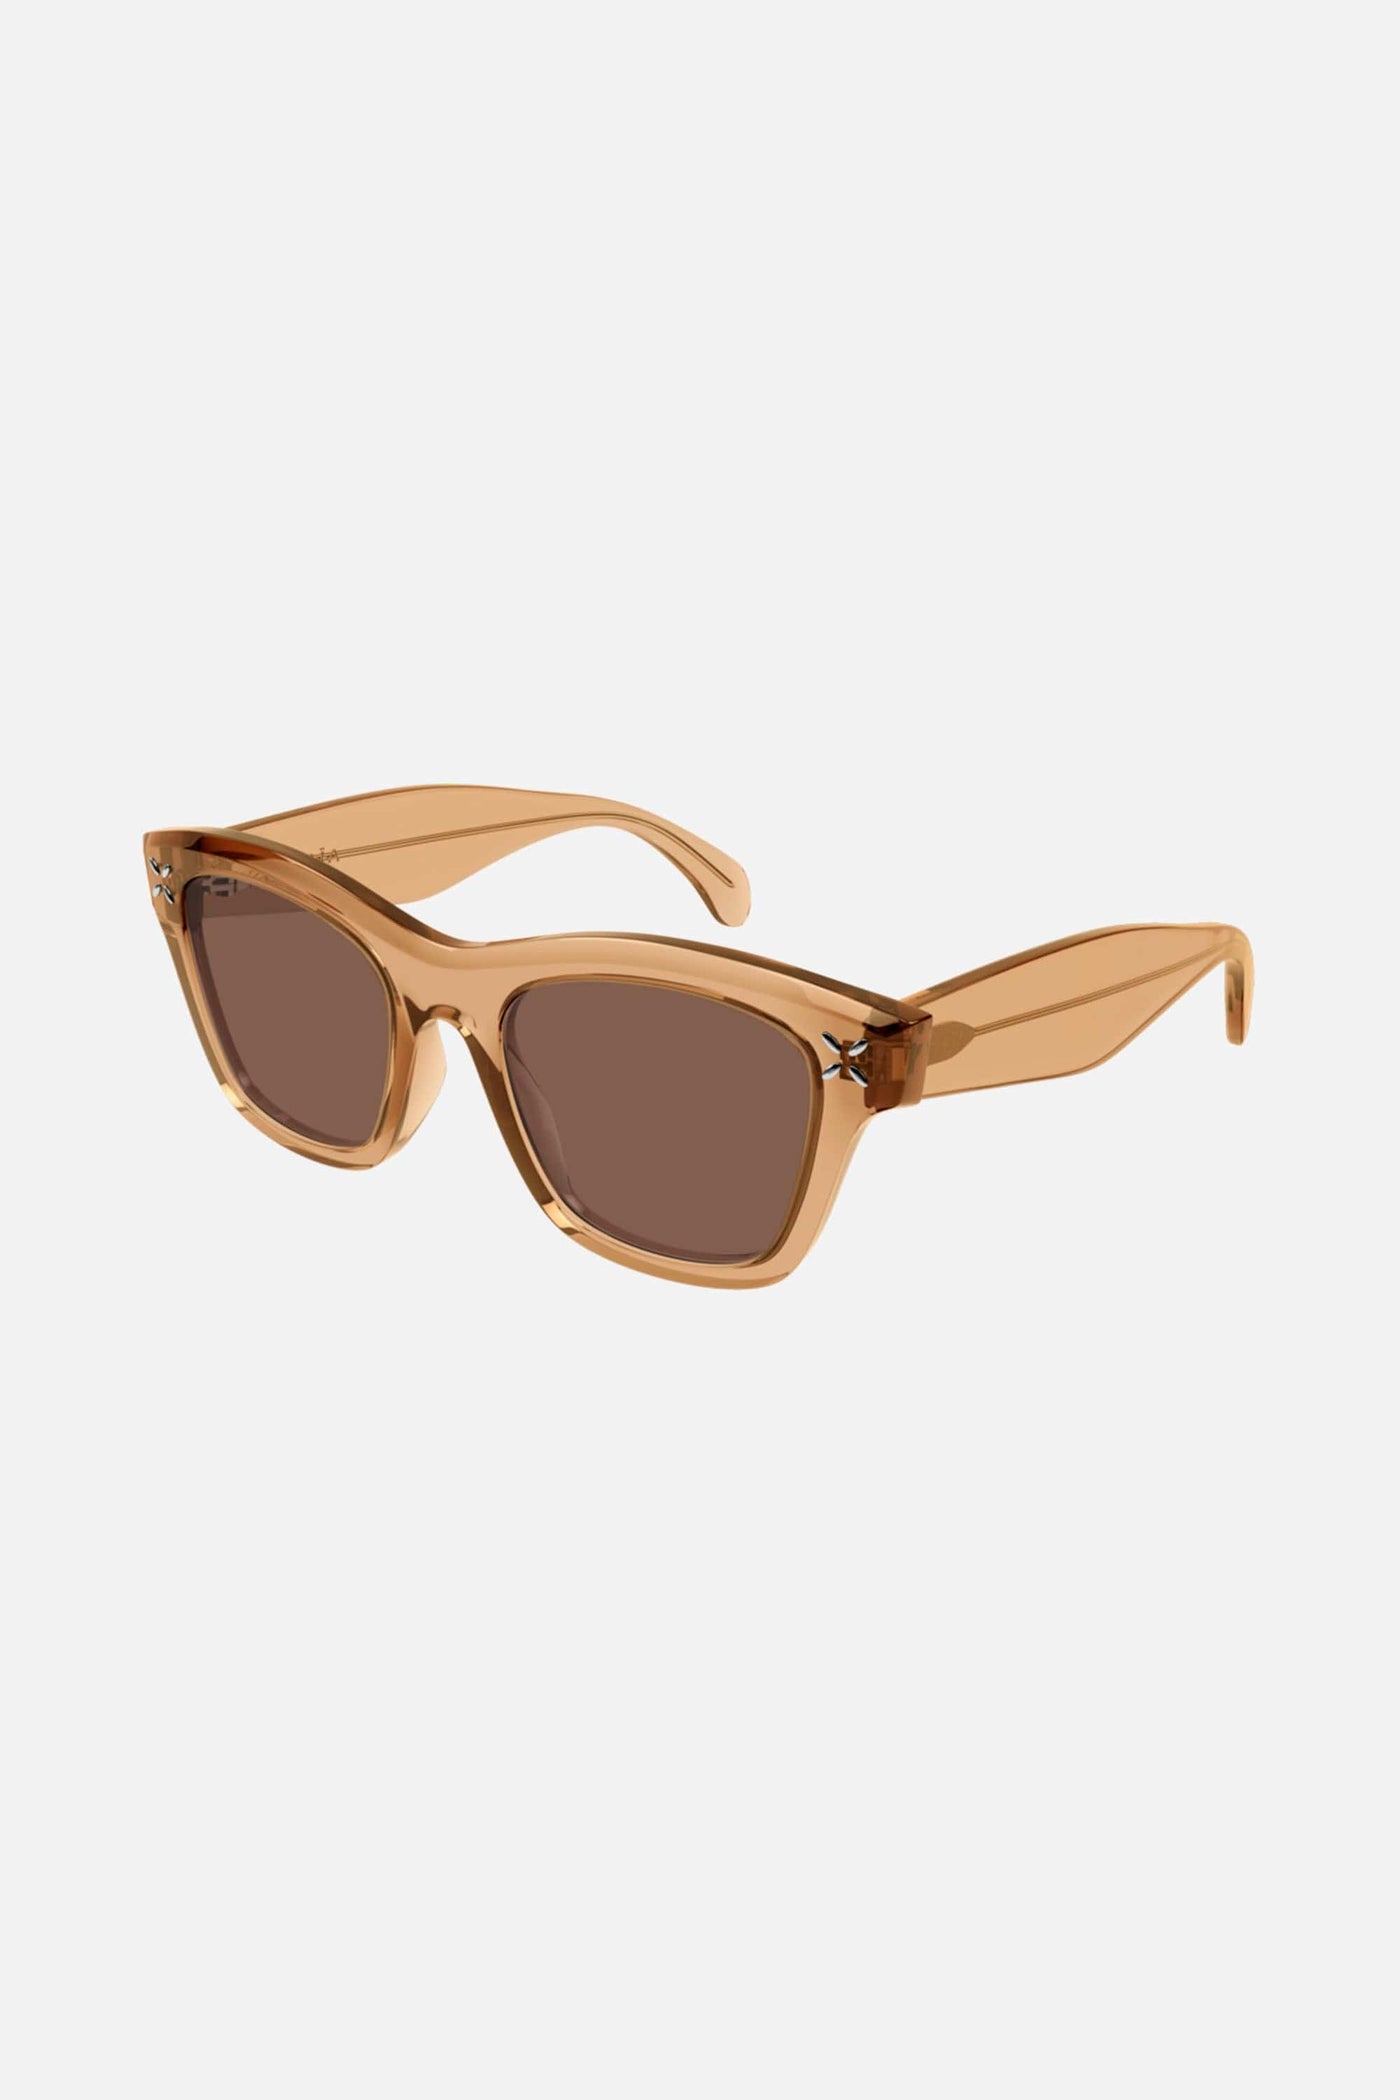 Alaia Women's Clear Contrasting Round Acetate Sunglasses